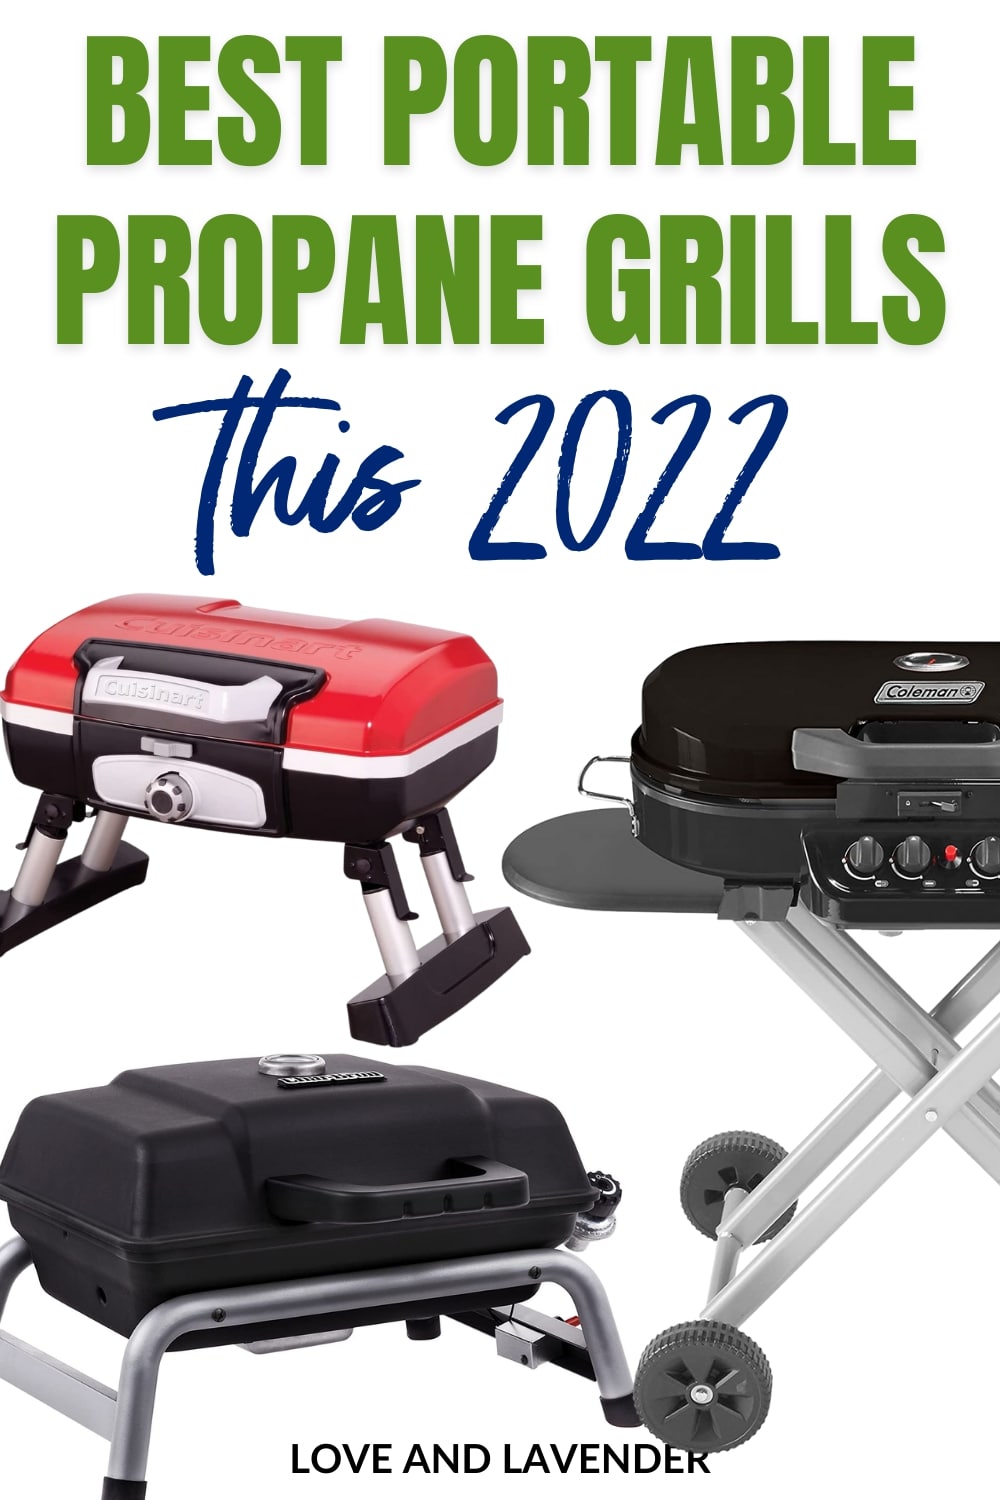 Want to grill on the go? Check out our top portable propane grills for your next adventure.